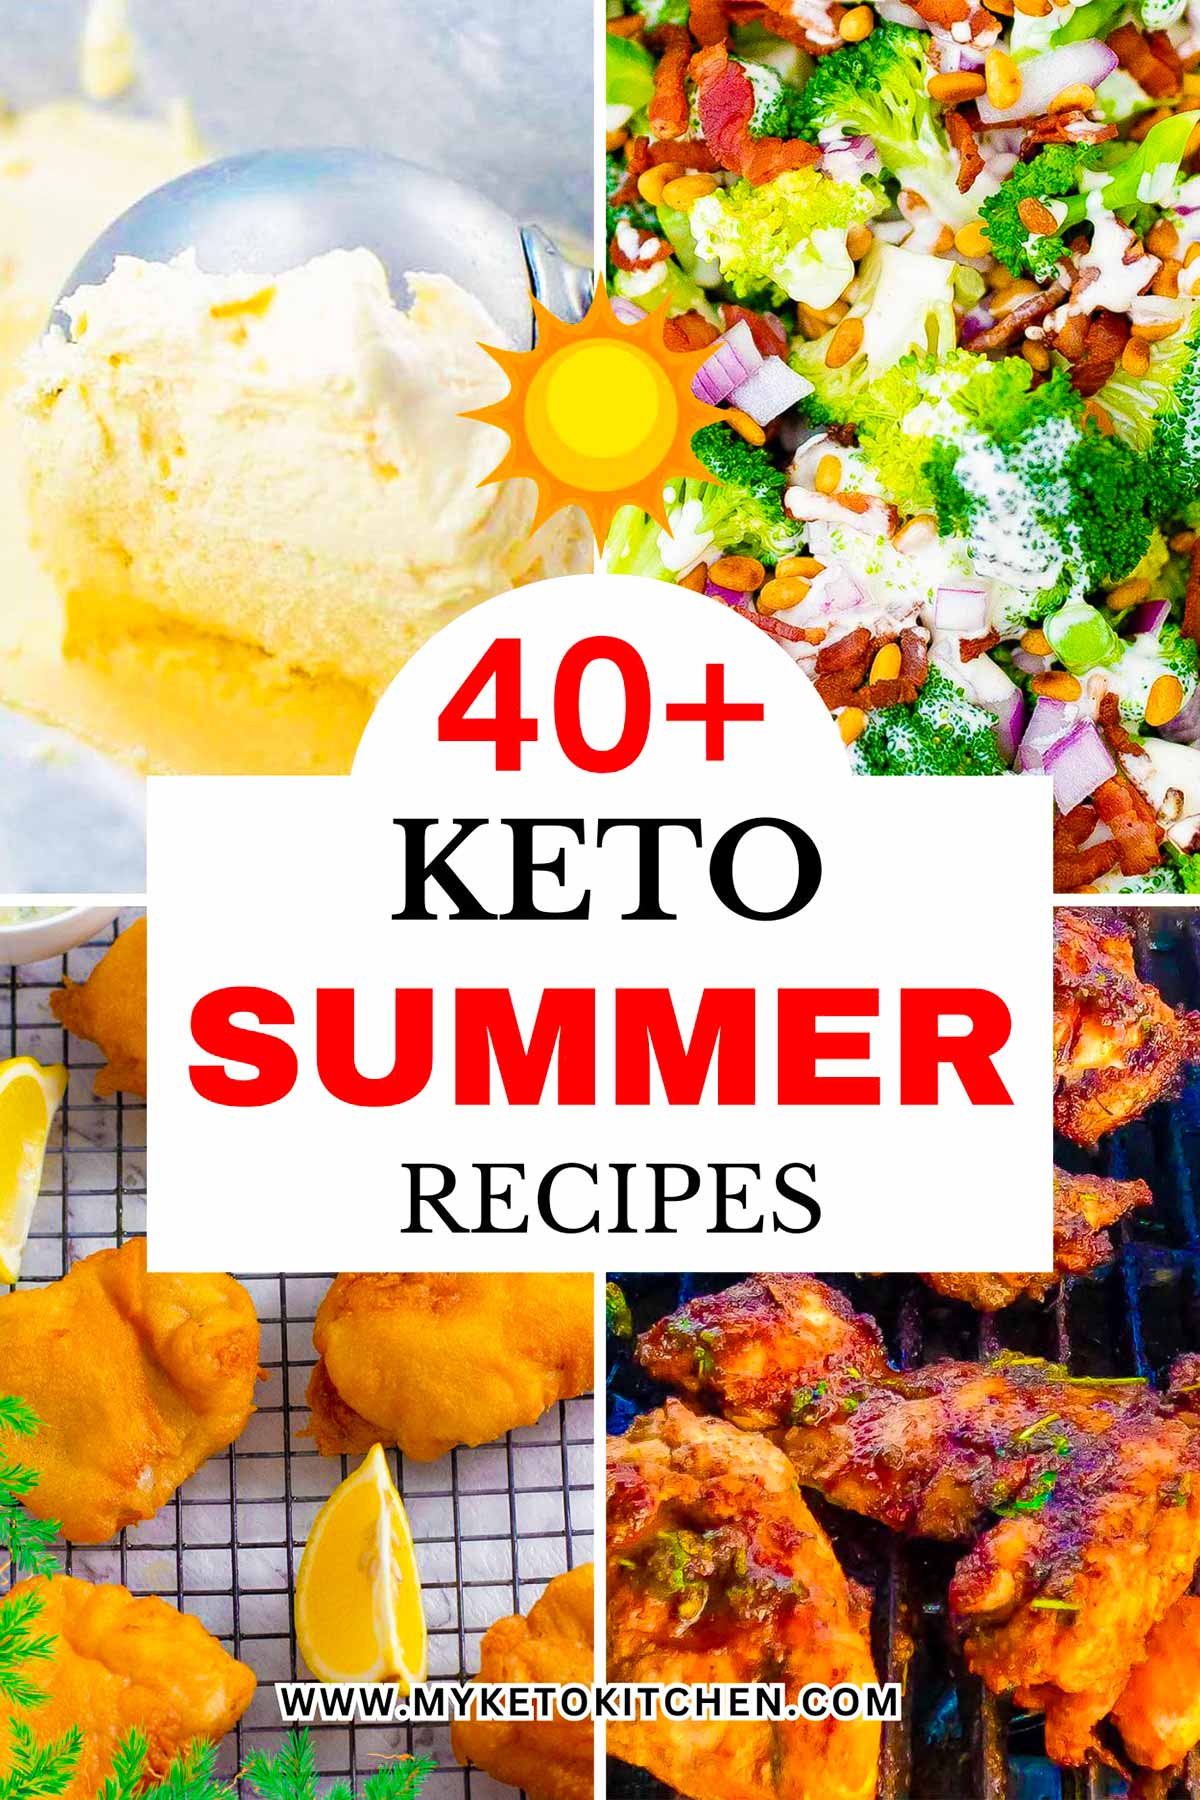 Keto summer recipe images. Broccoli salad, ice cream, chicken thighs and battered fish.